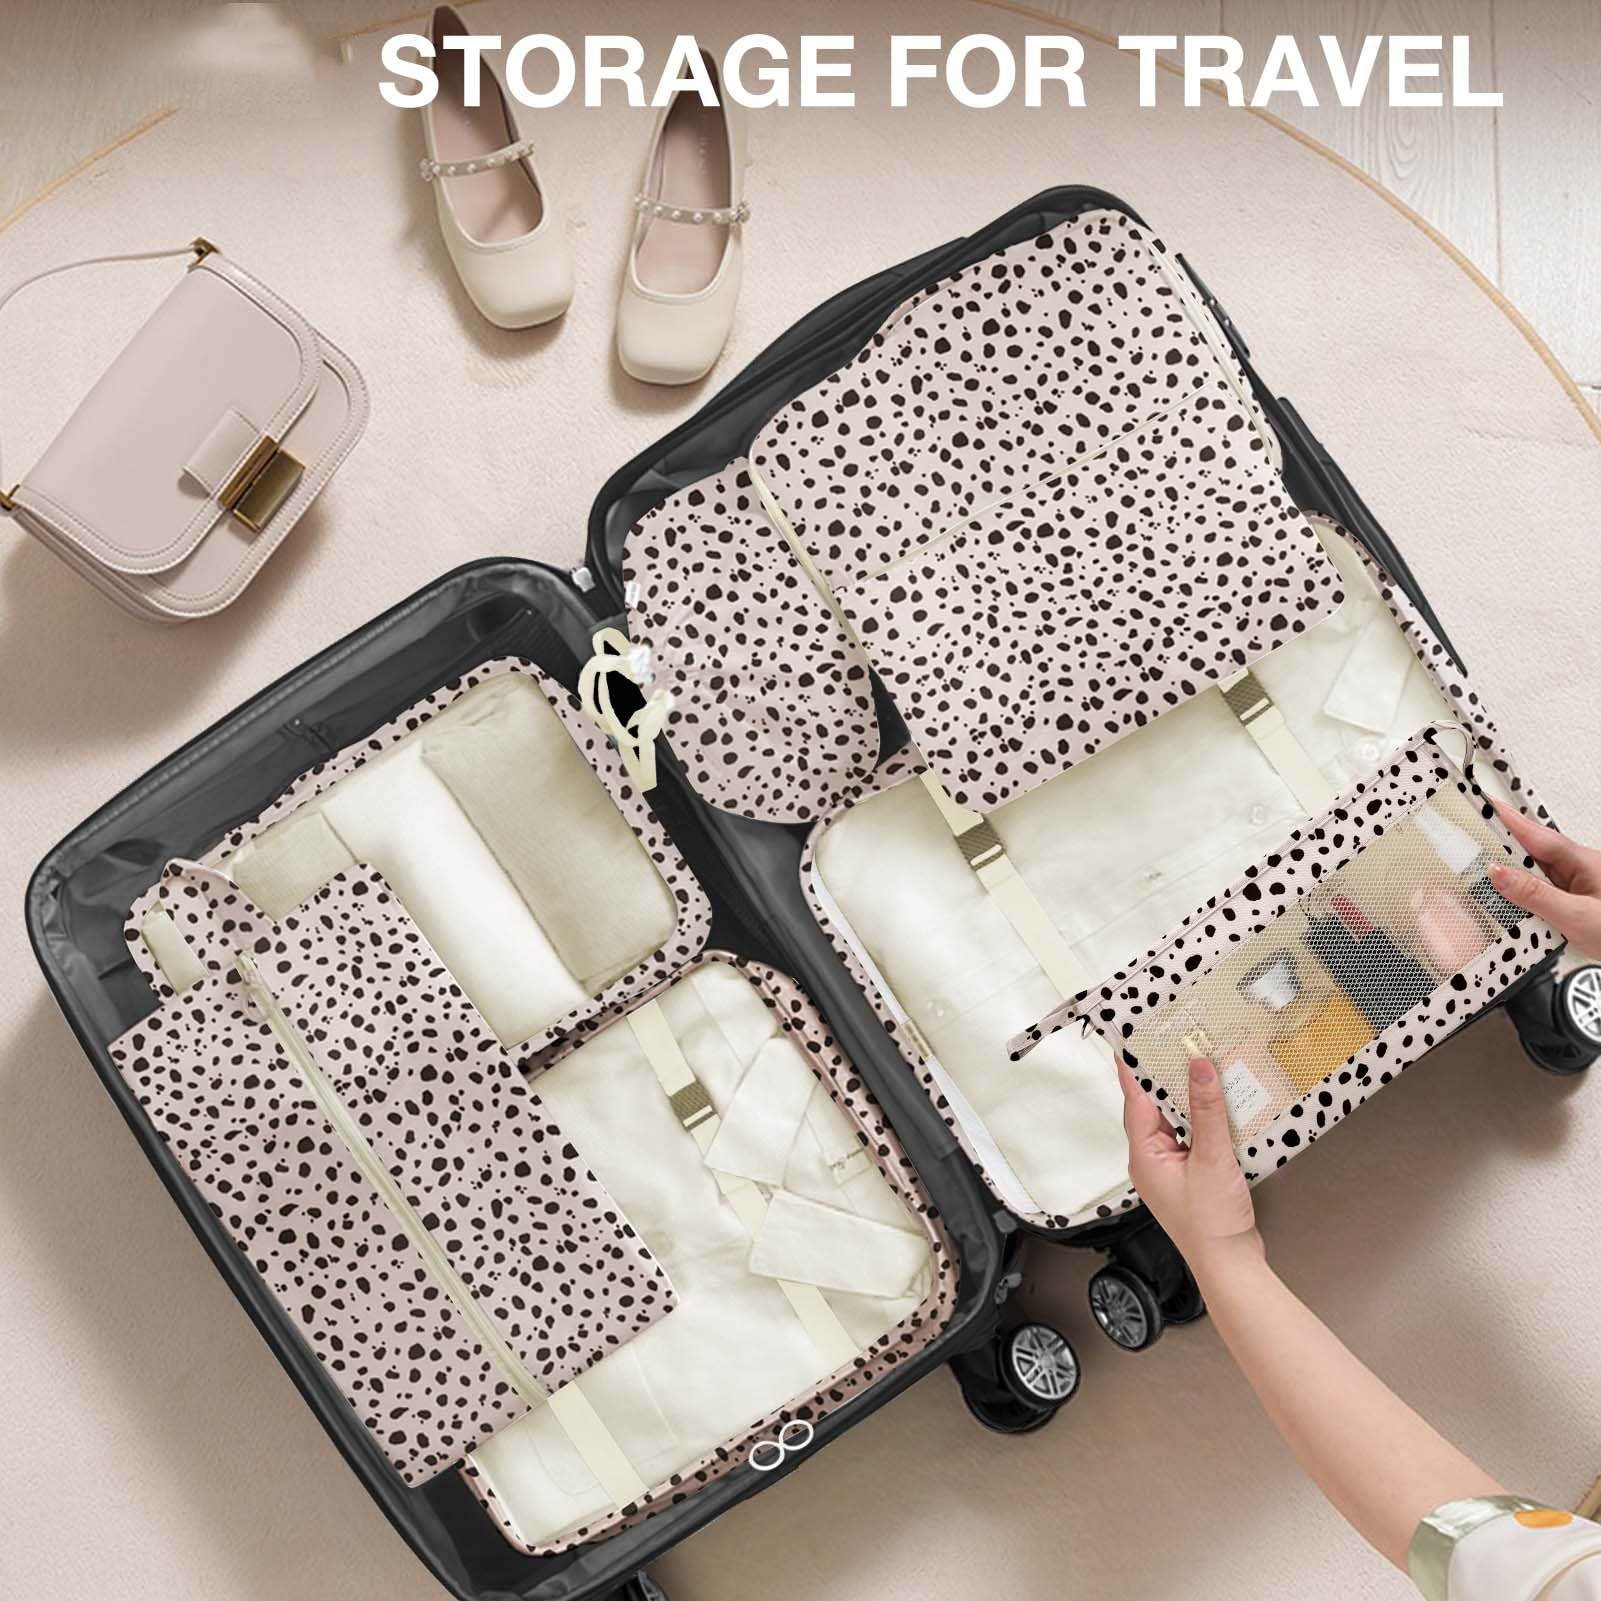 Waterproof Luggage Packing Organizers Product Details